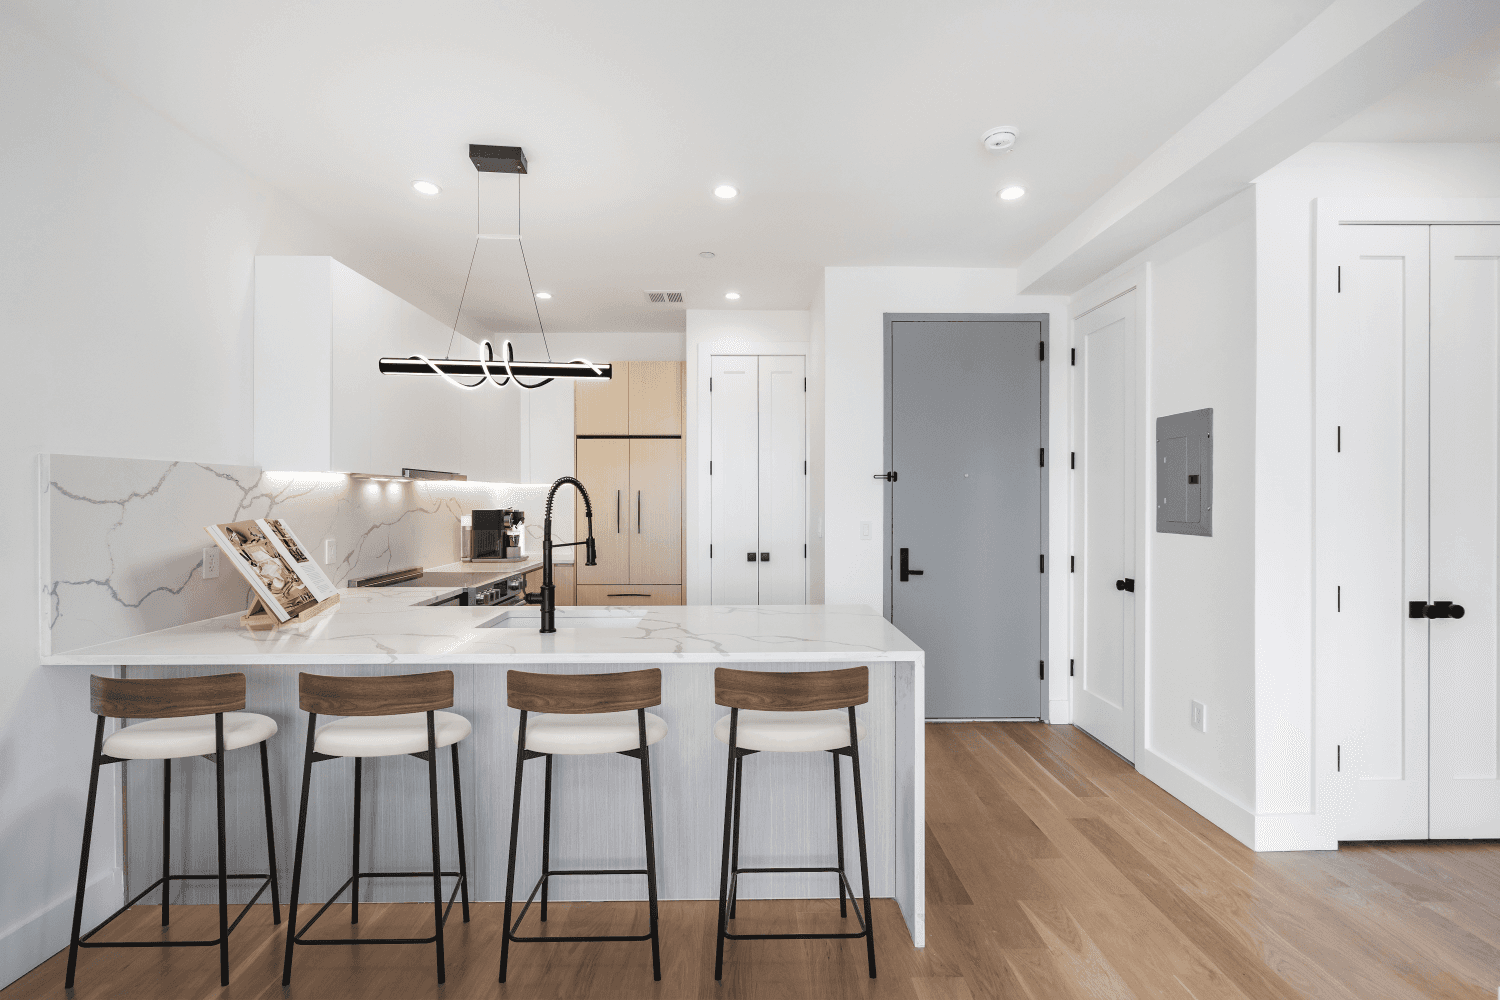 Welcome to Residence 2B at The Rockaway Where Affordability Meets Luxury LivingStep into an unparalleled residence, boasting superior finishes at a value unmatched in this emerging part of Brooklyn.